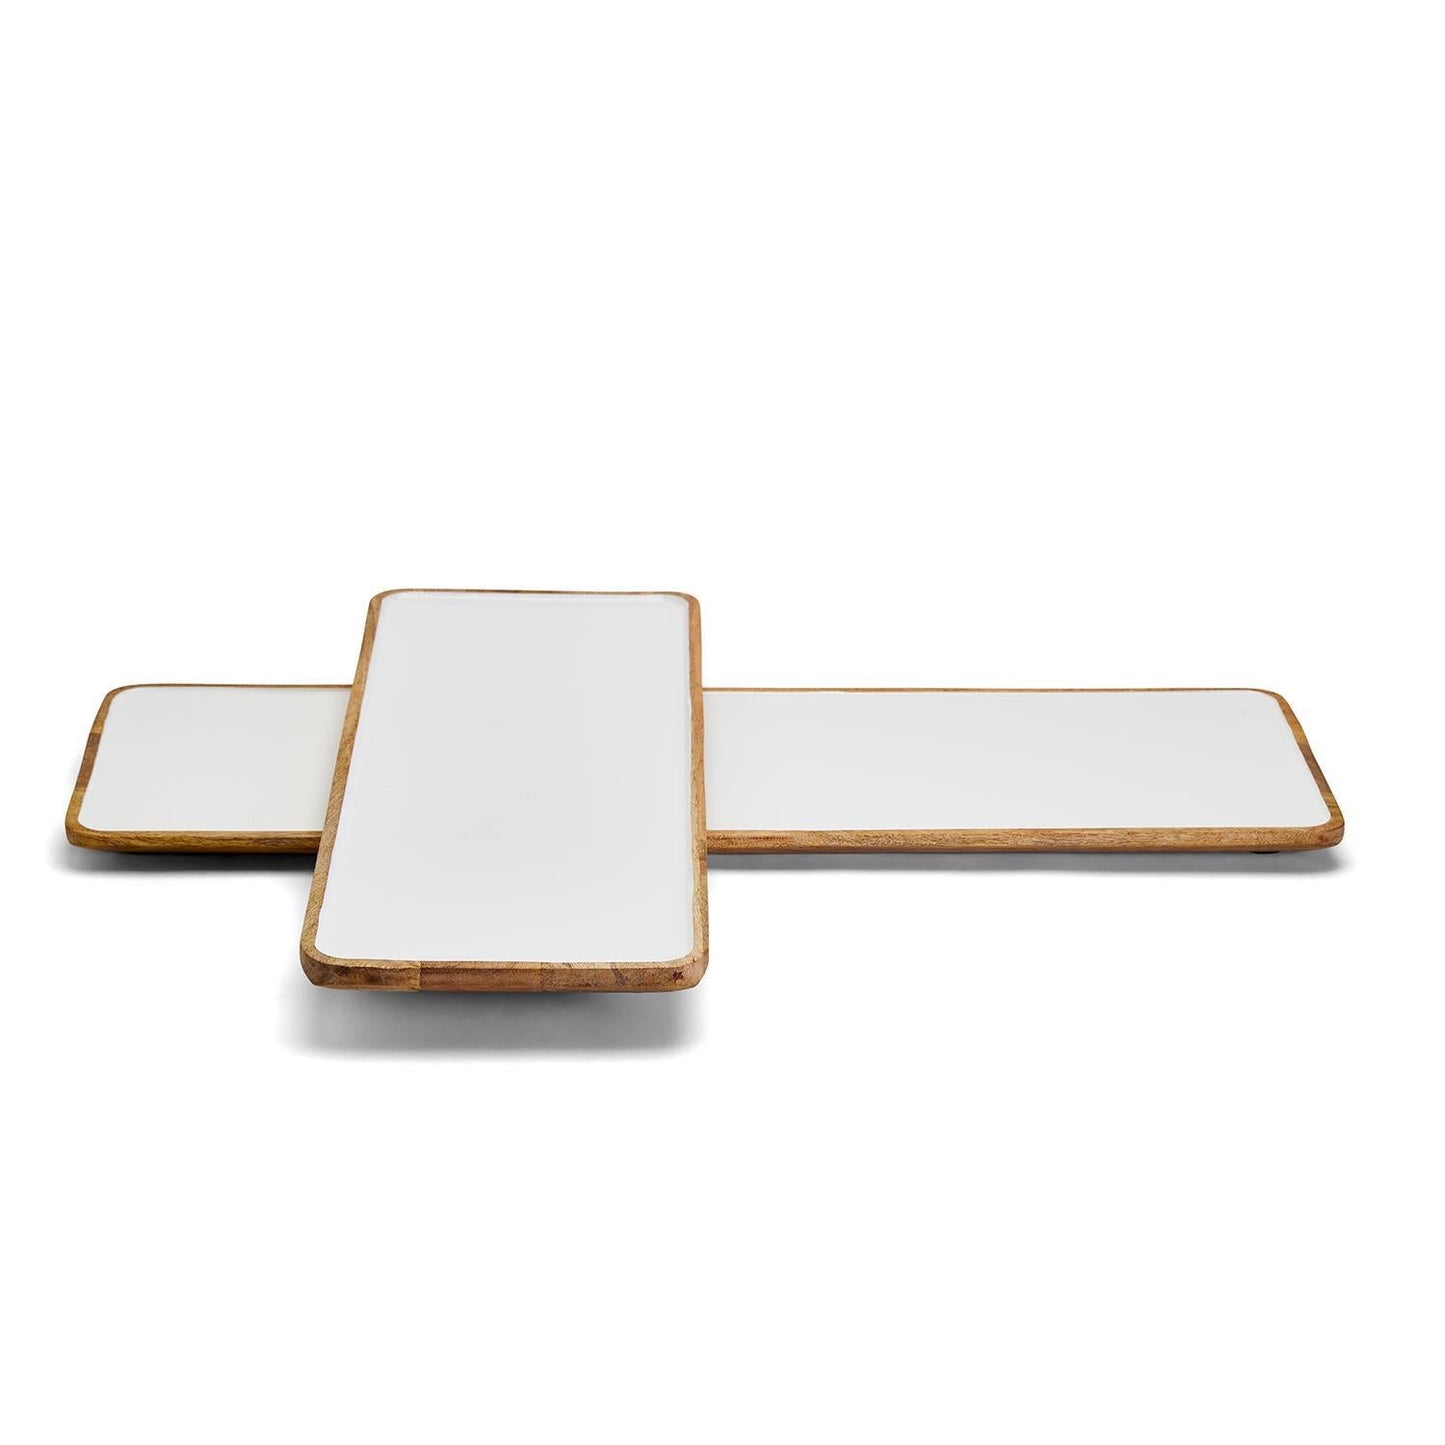 Small Grazing Soiree Hand-Crafted Long Serving Tray / Platter